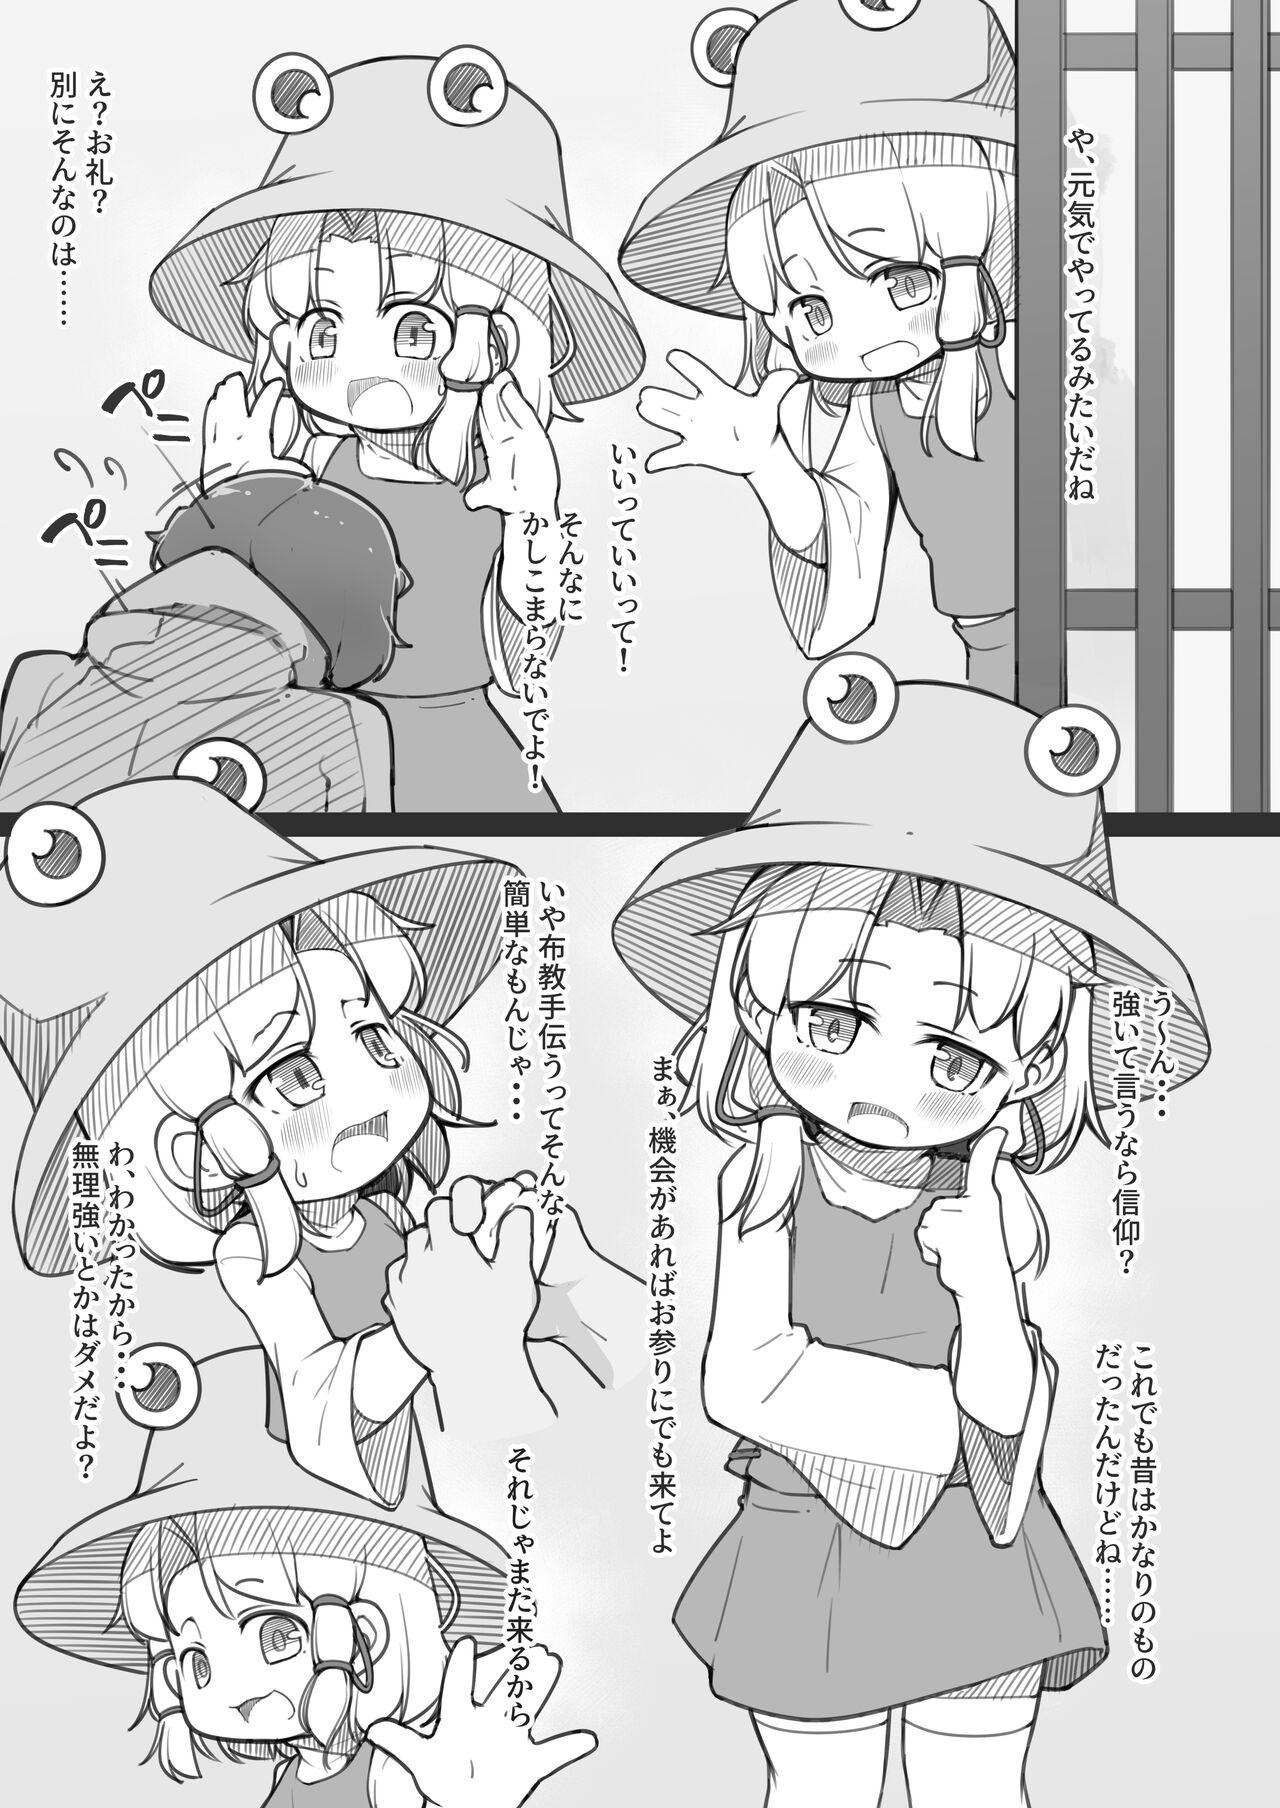 Bed 幻想入りしたカリスマ教祖に諏訪子さまが祀り上げられる話 - Touhou project Butt Sex - Page 4